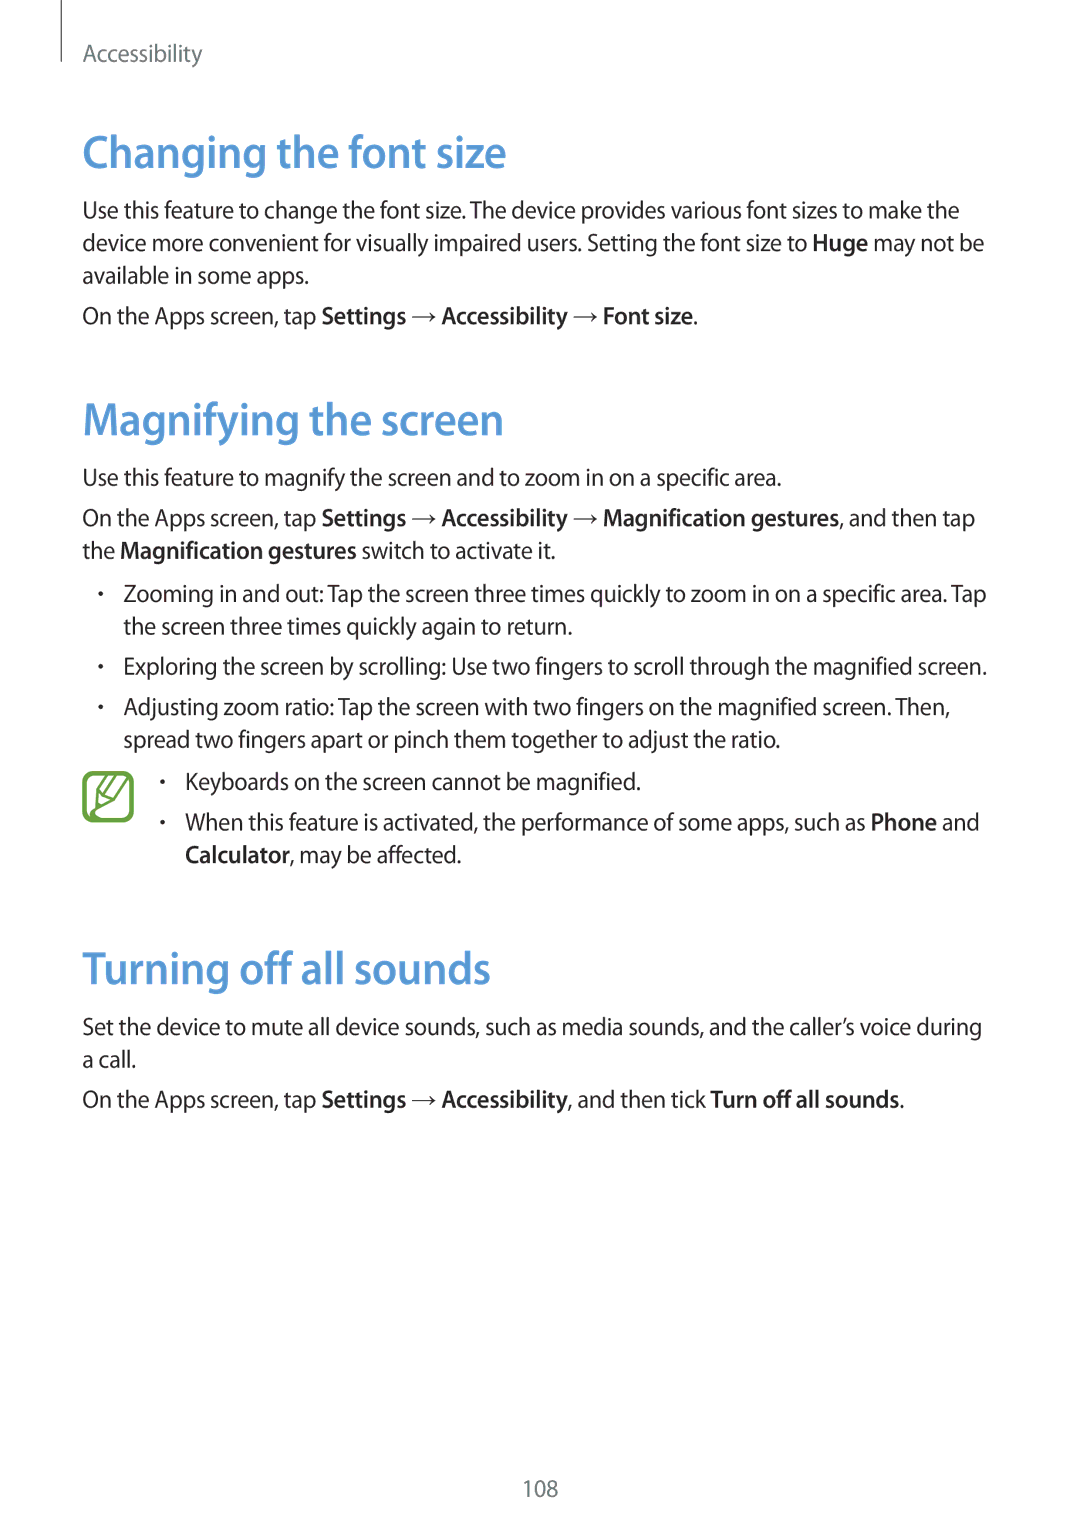 Samsung SM-G110HZKAXXV, SM-G110HZWAXXV manual Changing the font size, Magnifying the screen, Turning off all sounds 